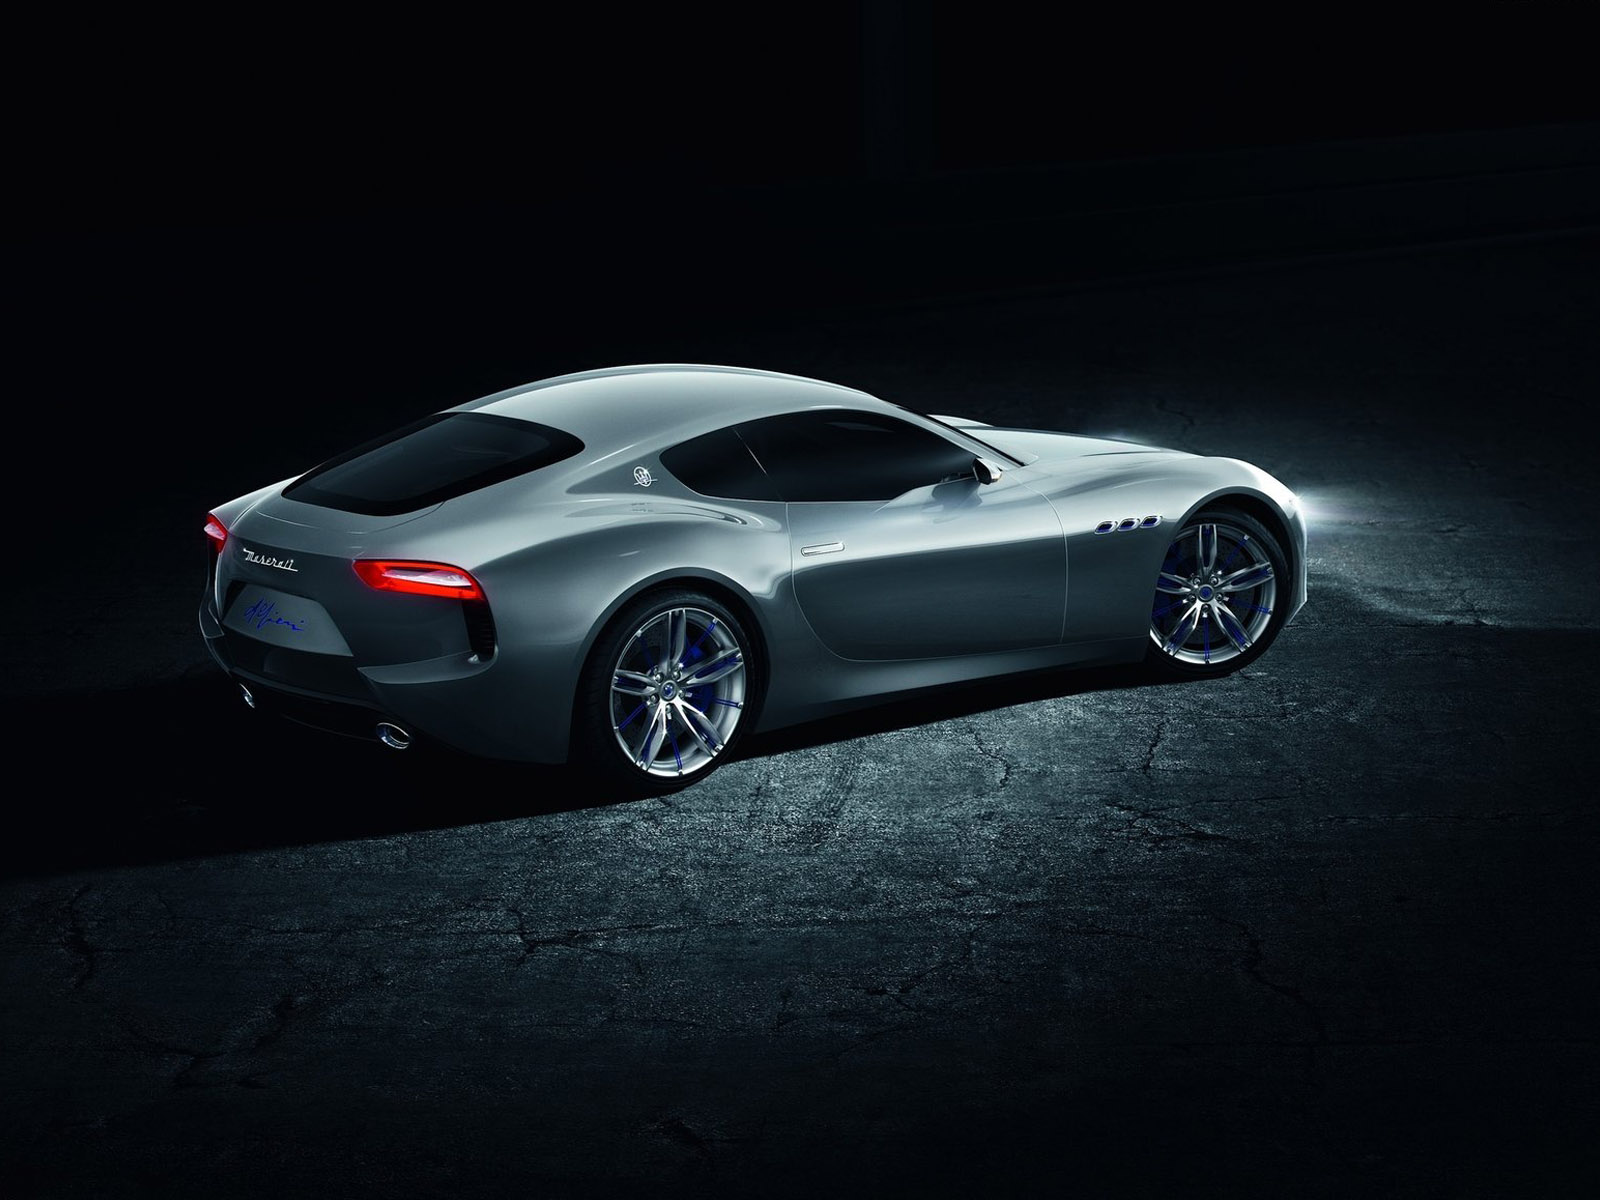 Free Download Back To Article For Full Reviews Maserati Alfieri Images, Photos, Reviews